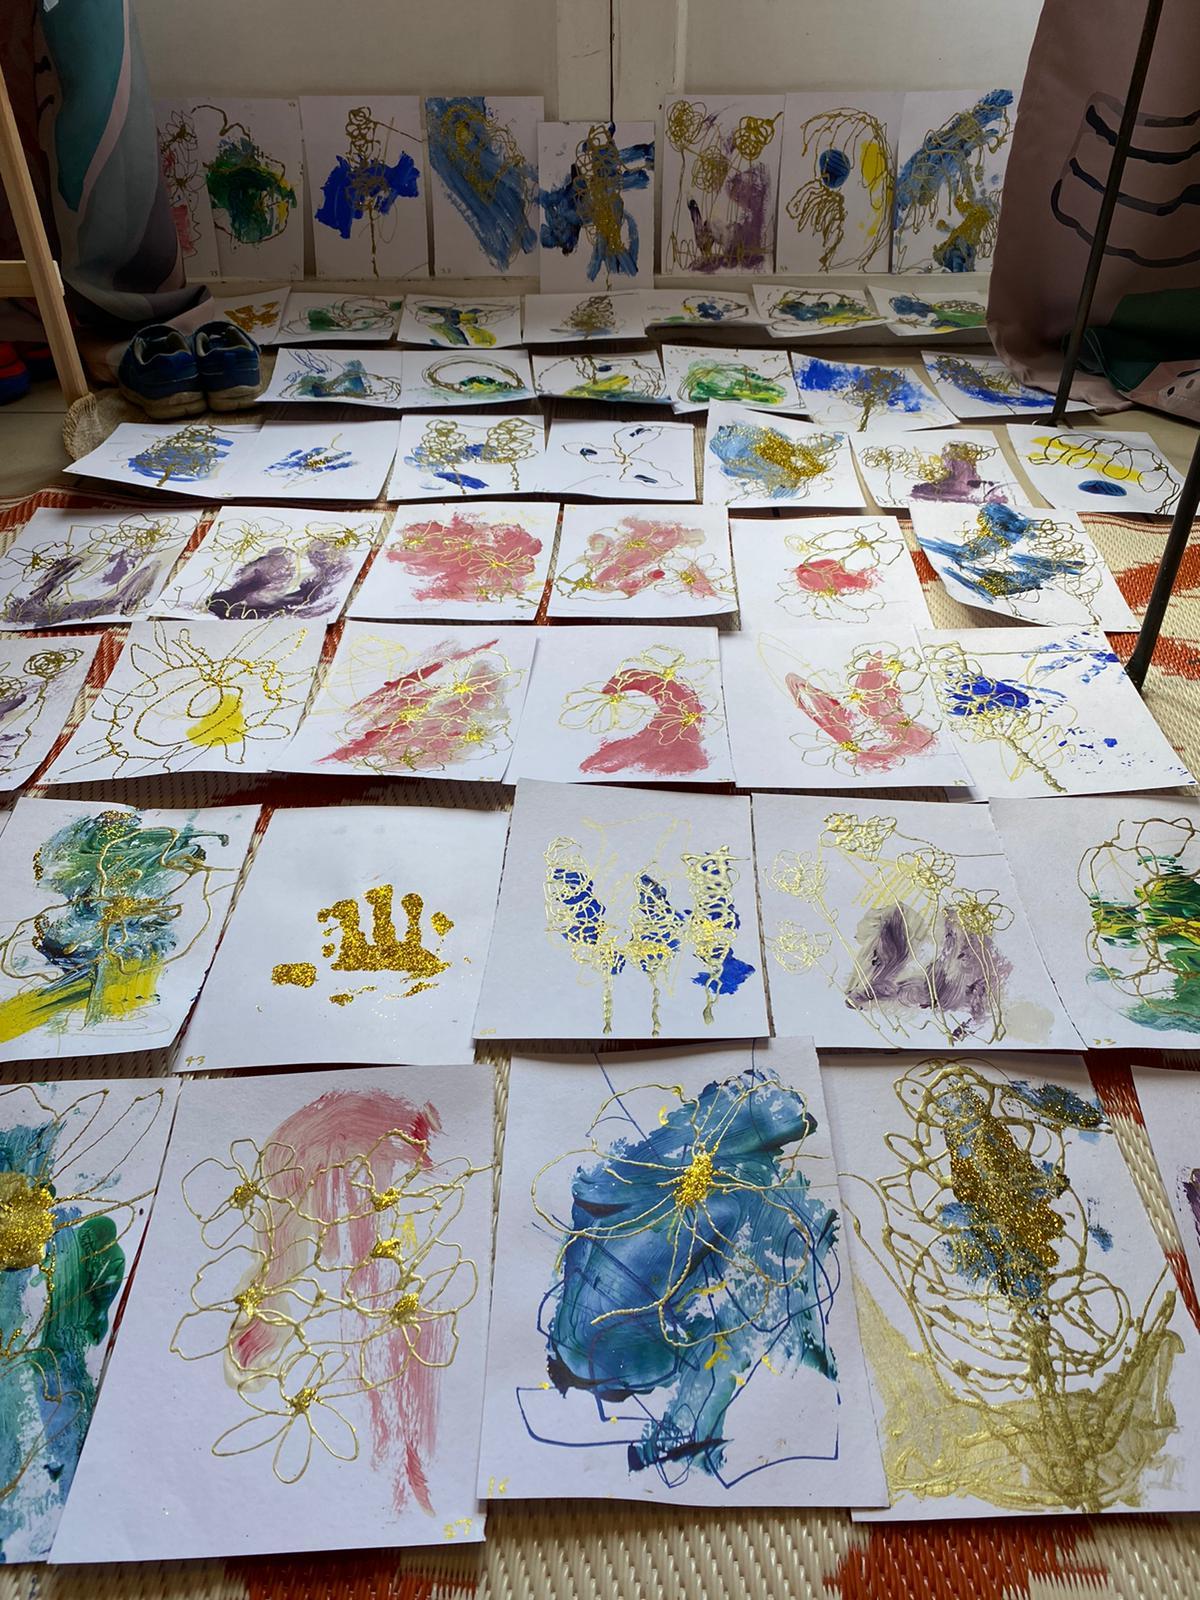 Lucy and Archie made 100 paintings in honour of Tom Moore